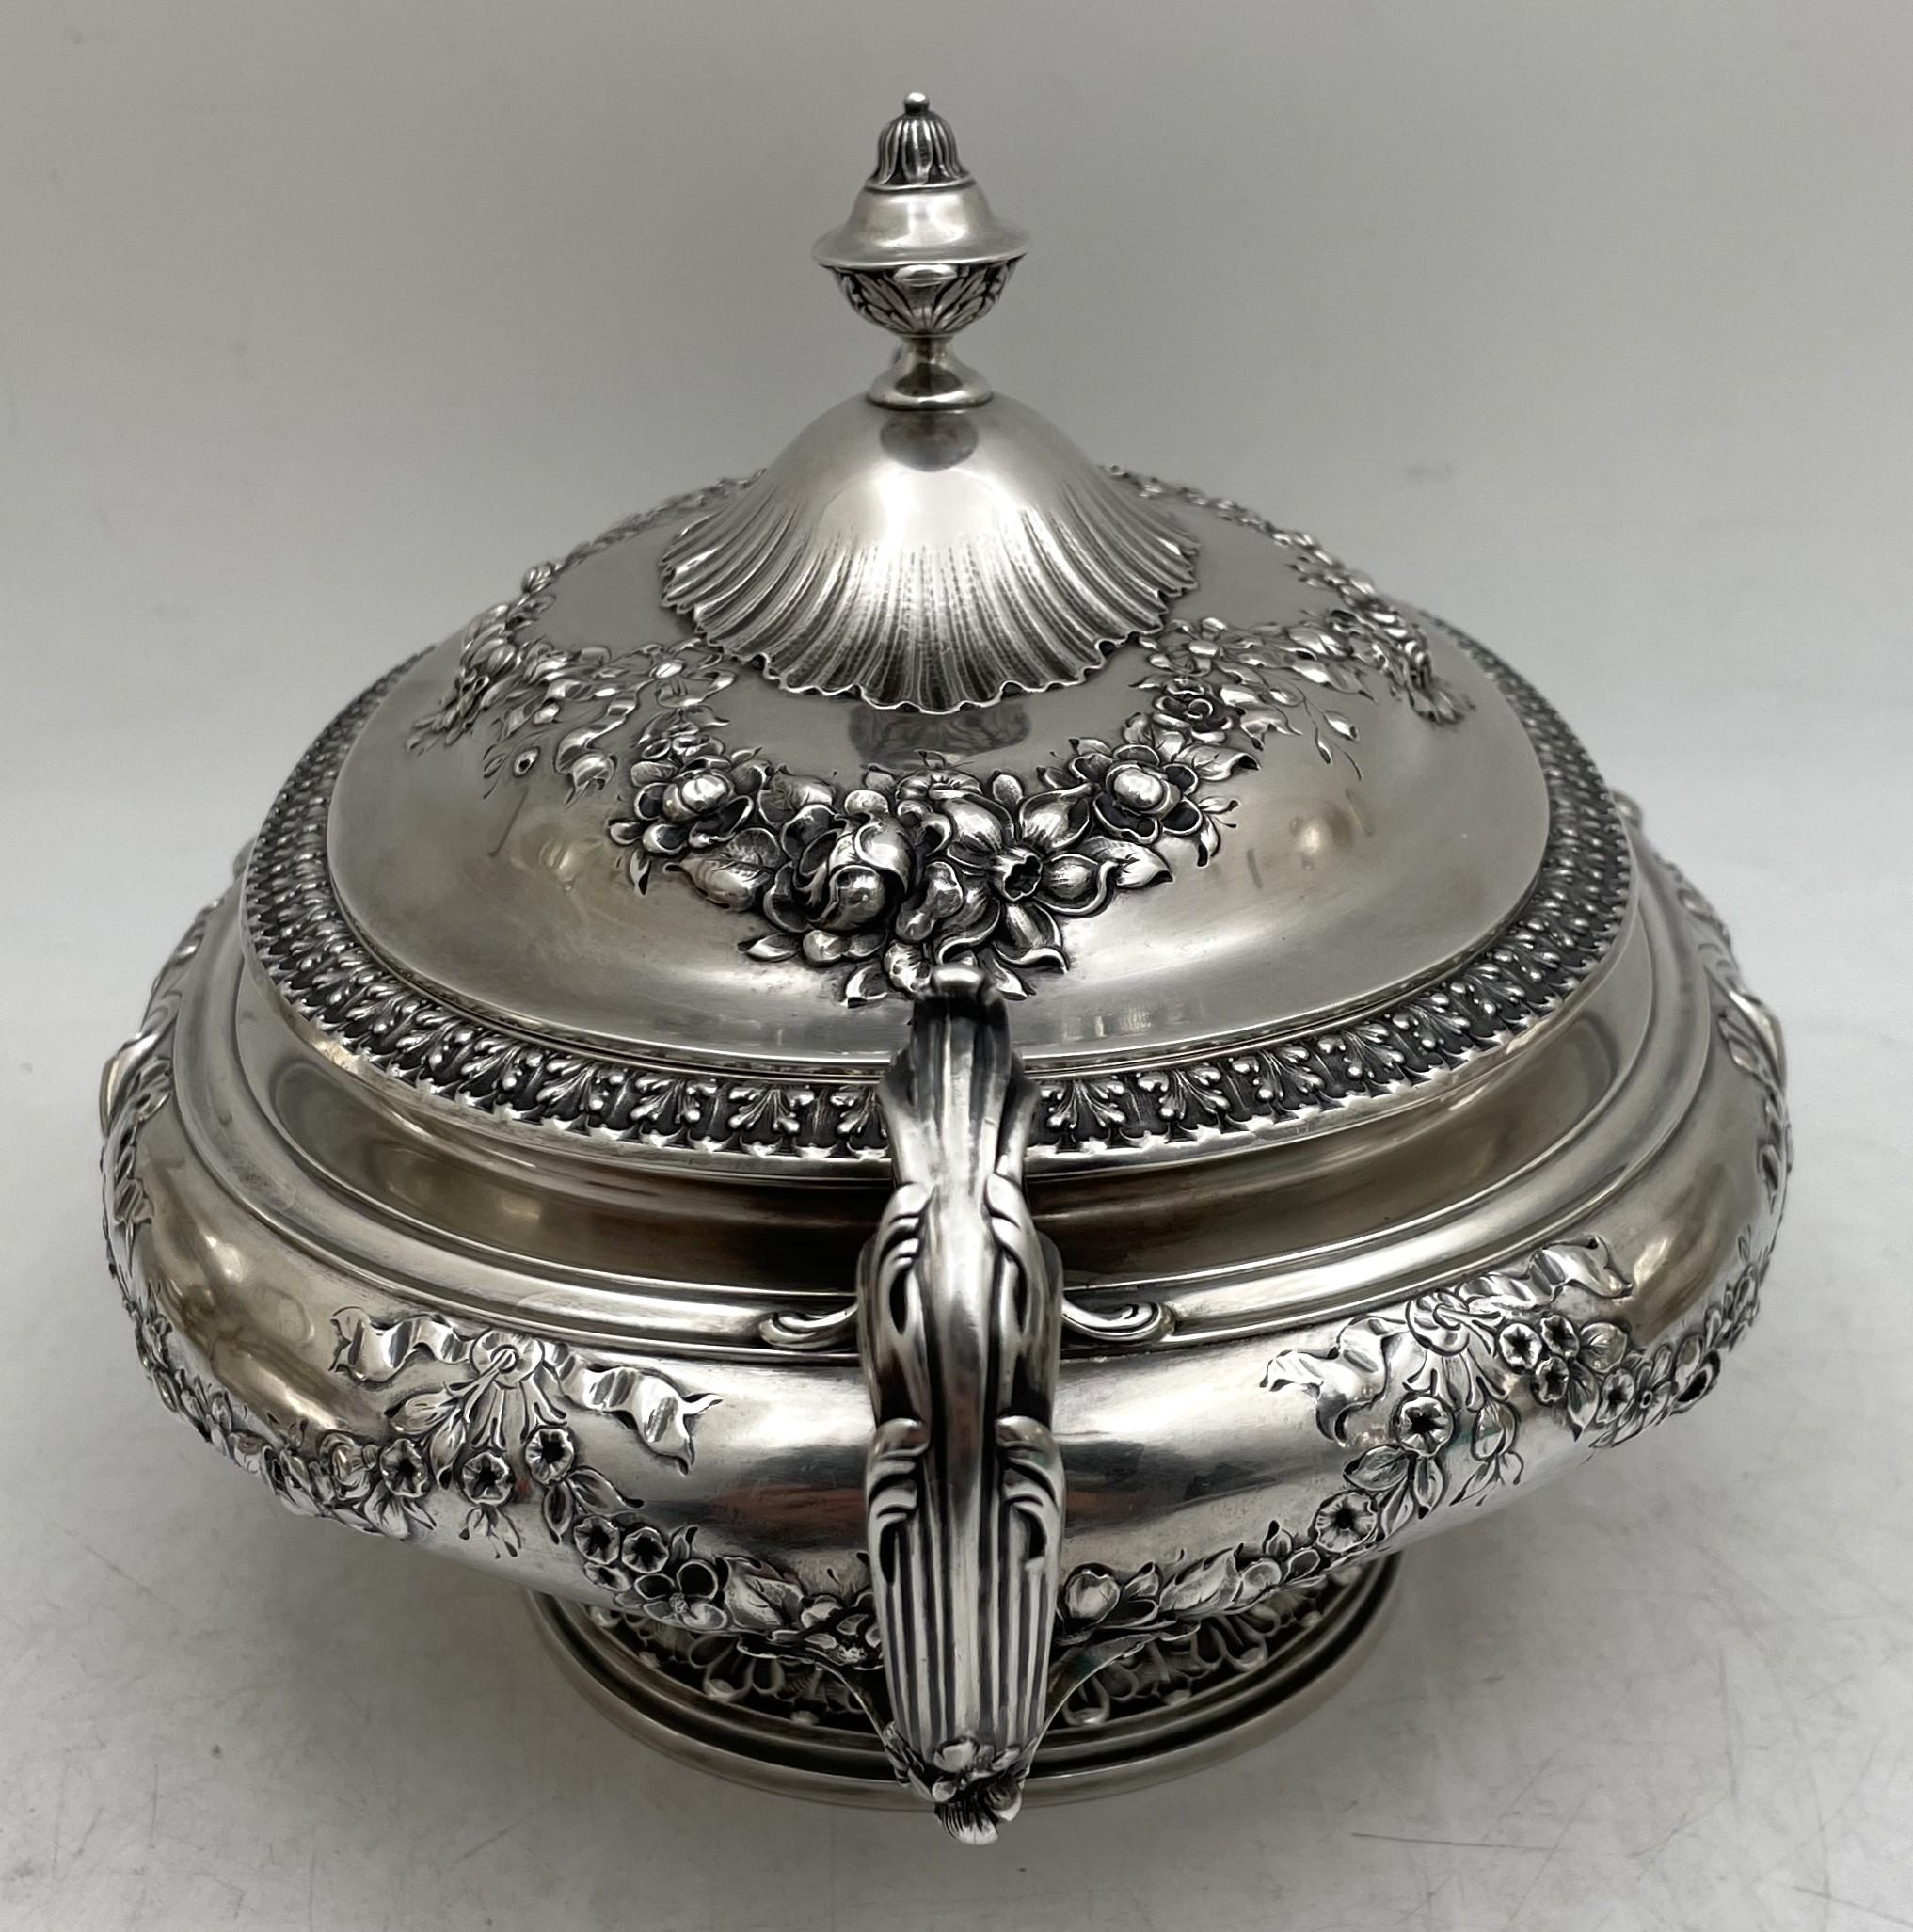 Gorham sterling silver two-handled tureen or covered bowl from 1898 and in Art Nouveau style, beautifully adorned with flowing flowers, bows, and other stylized motifs. It measures 11 1/3'' from handle to handle by 7 1/4'' in depth by 7'' in height